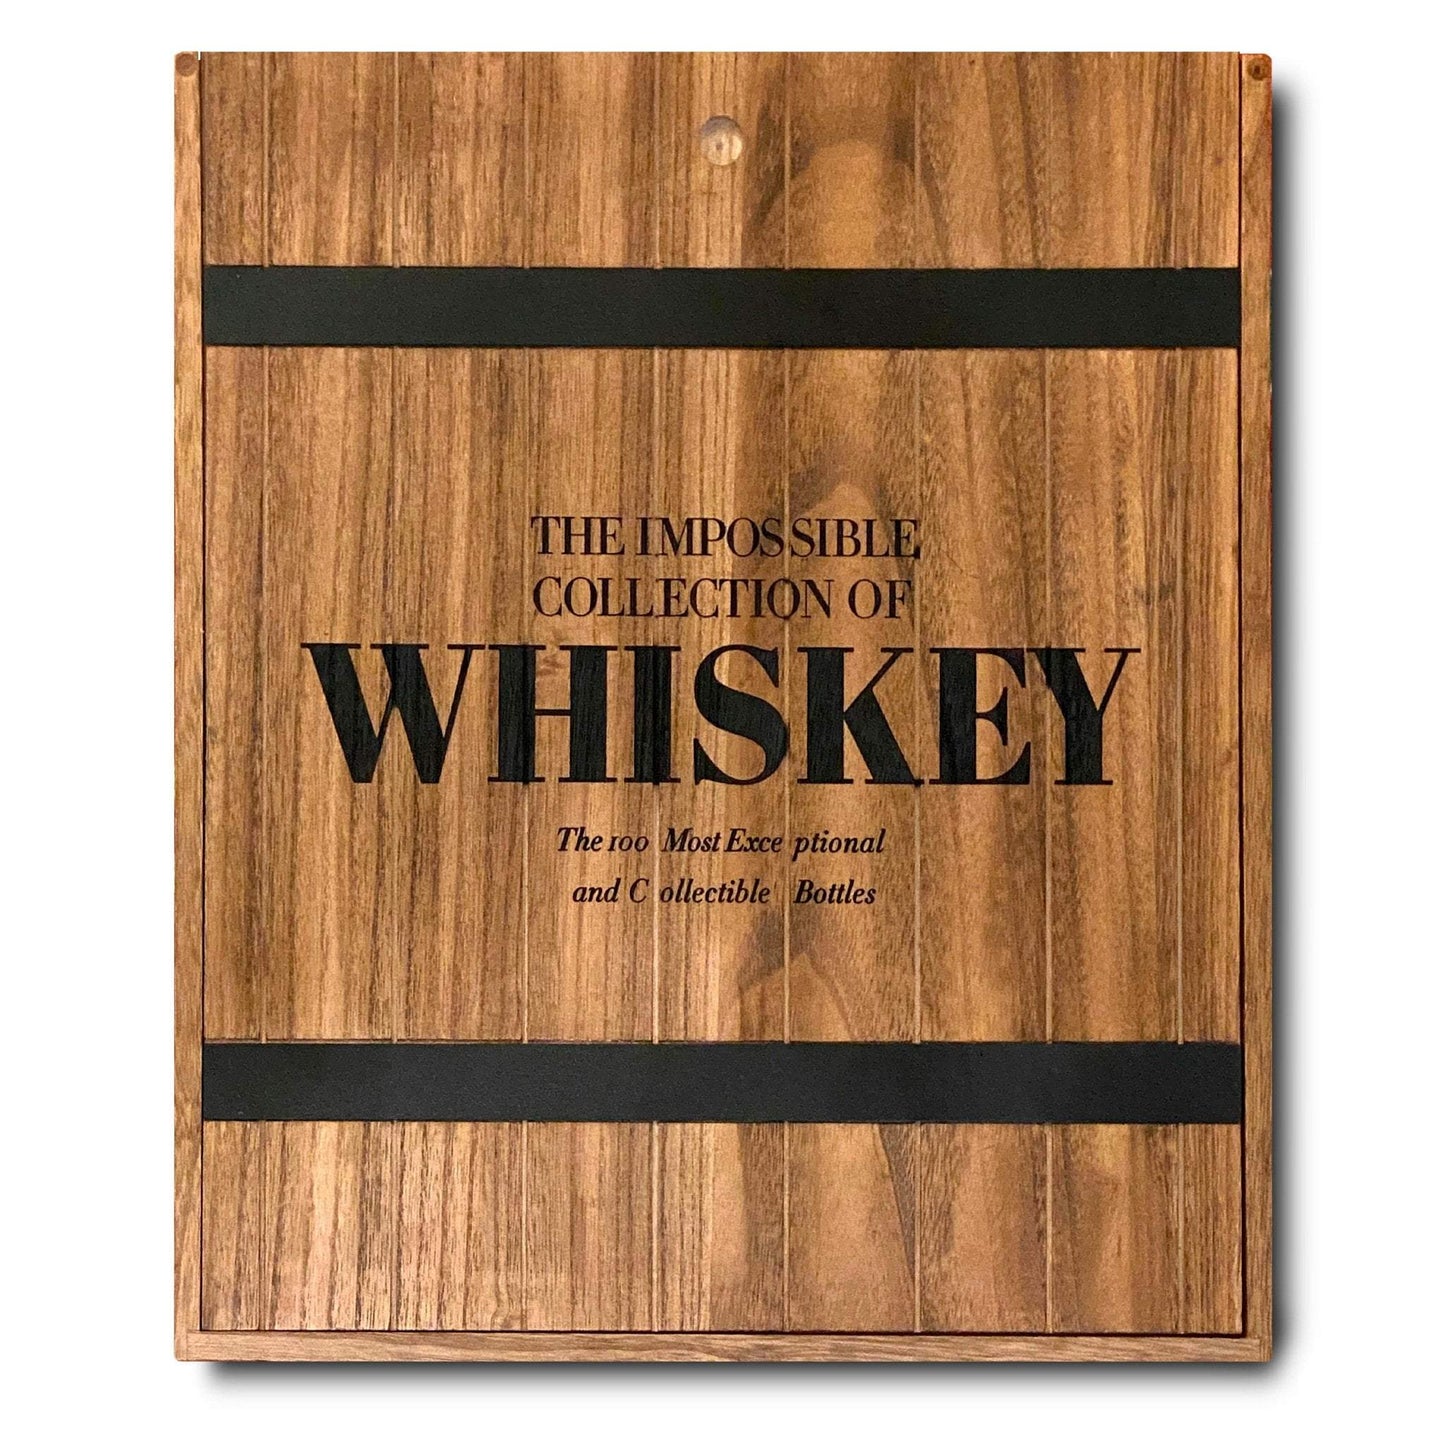 Book Whiskey: Impossible collection